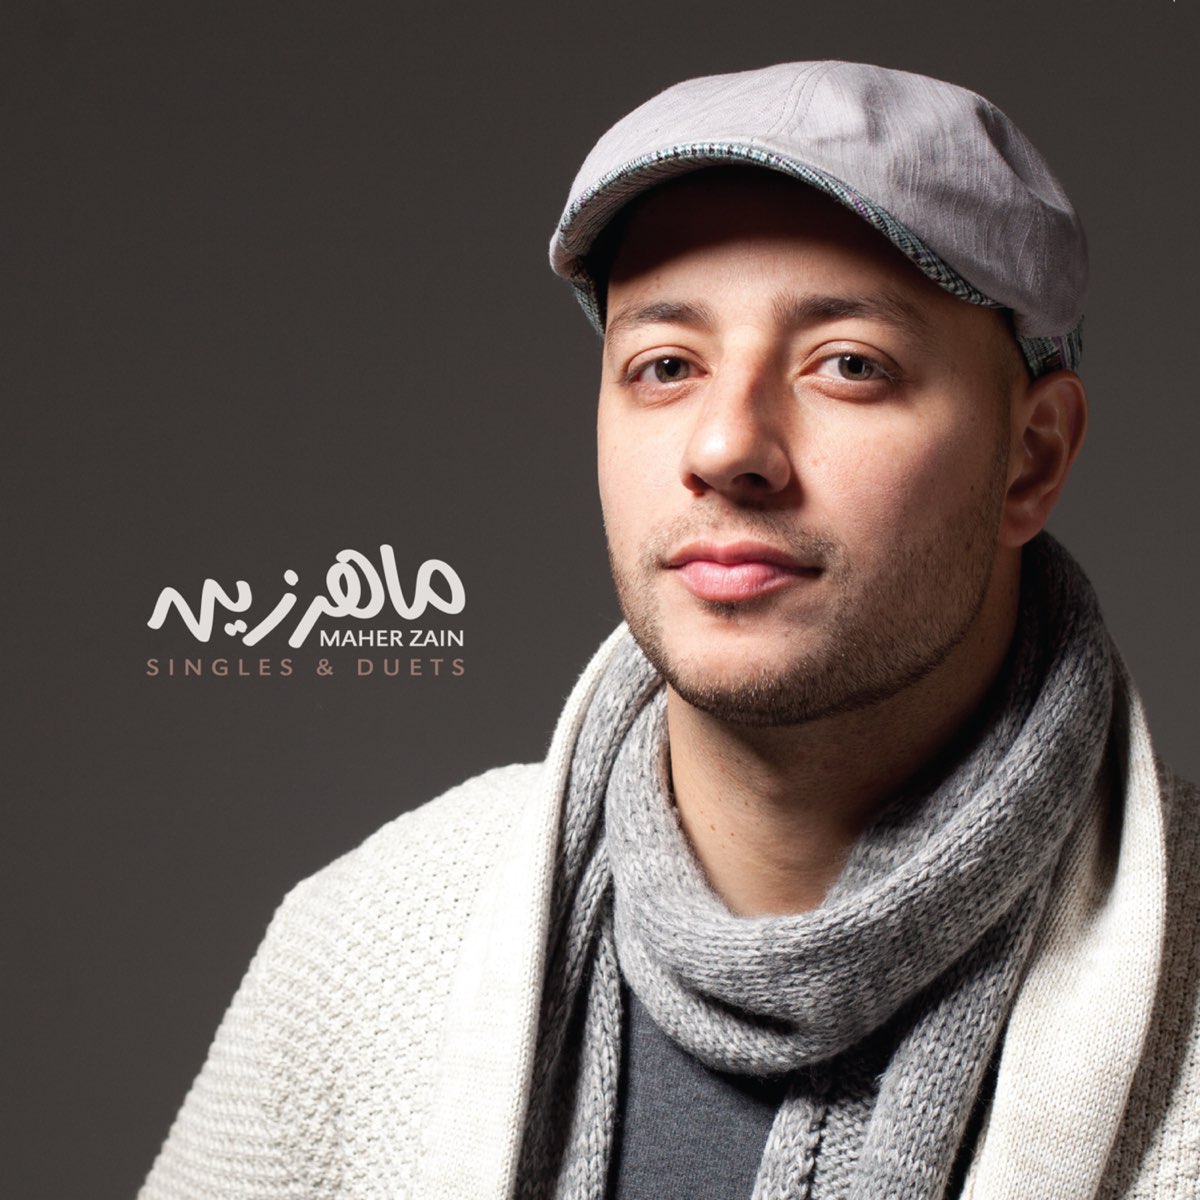 Singles & Duets by Maher Zain on Apple Music